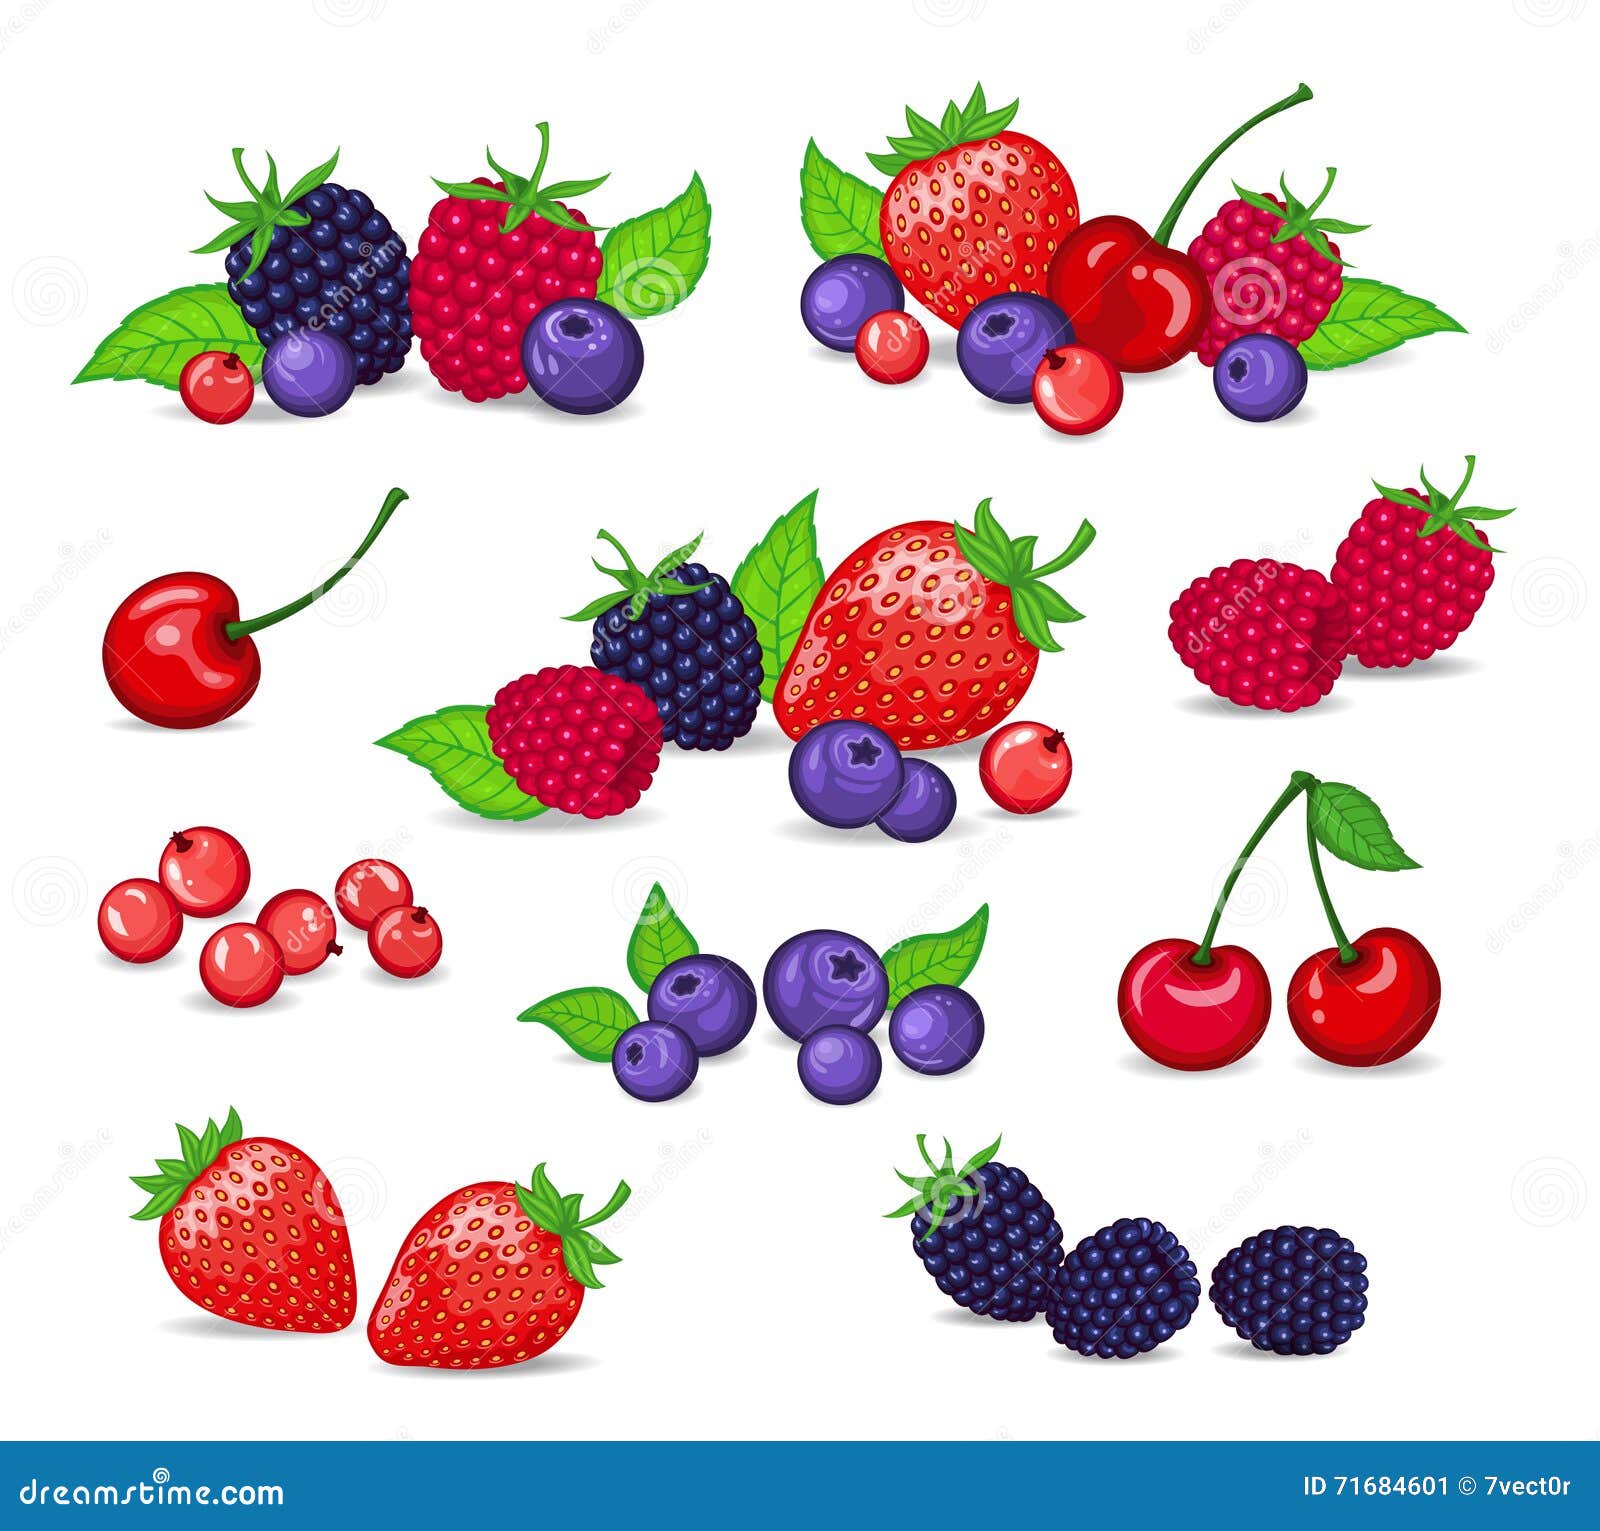 berries collection